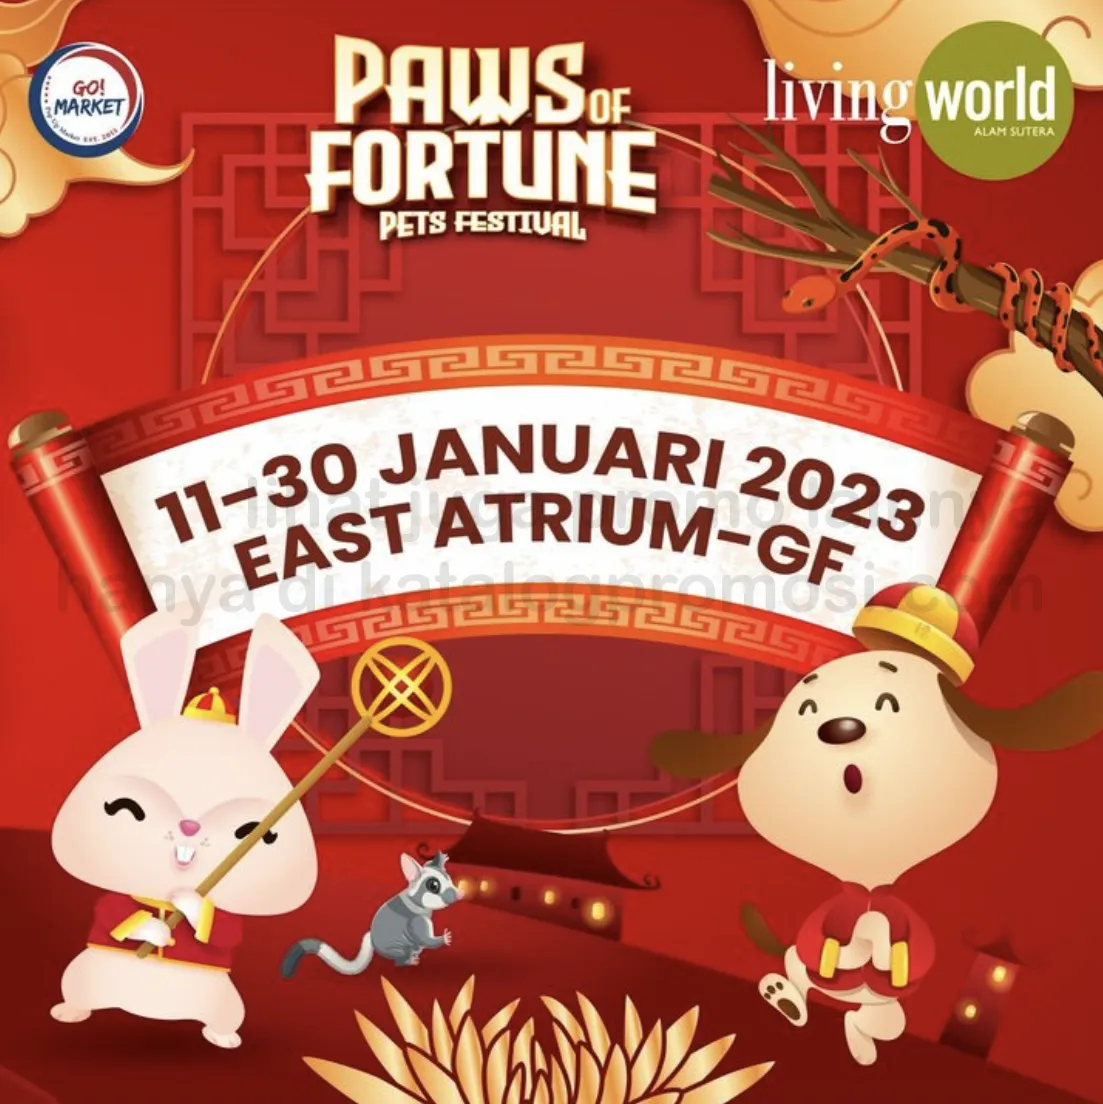 LIVING WORLD ALAM SUTERA present Paws of Fortune Pets Festival